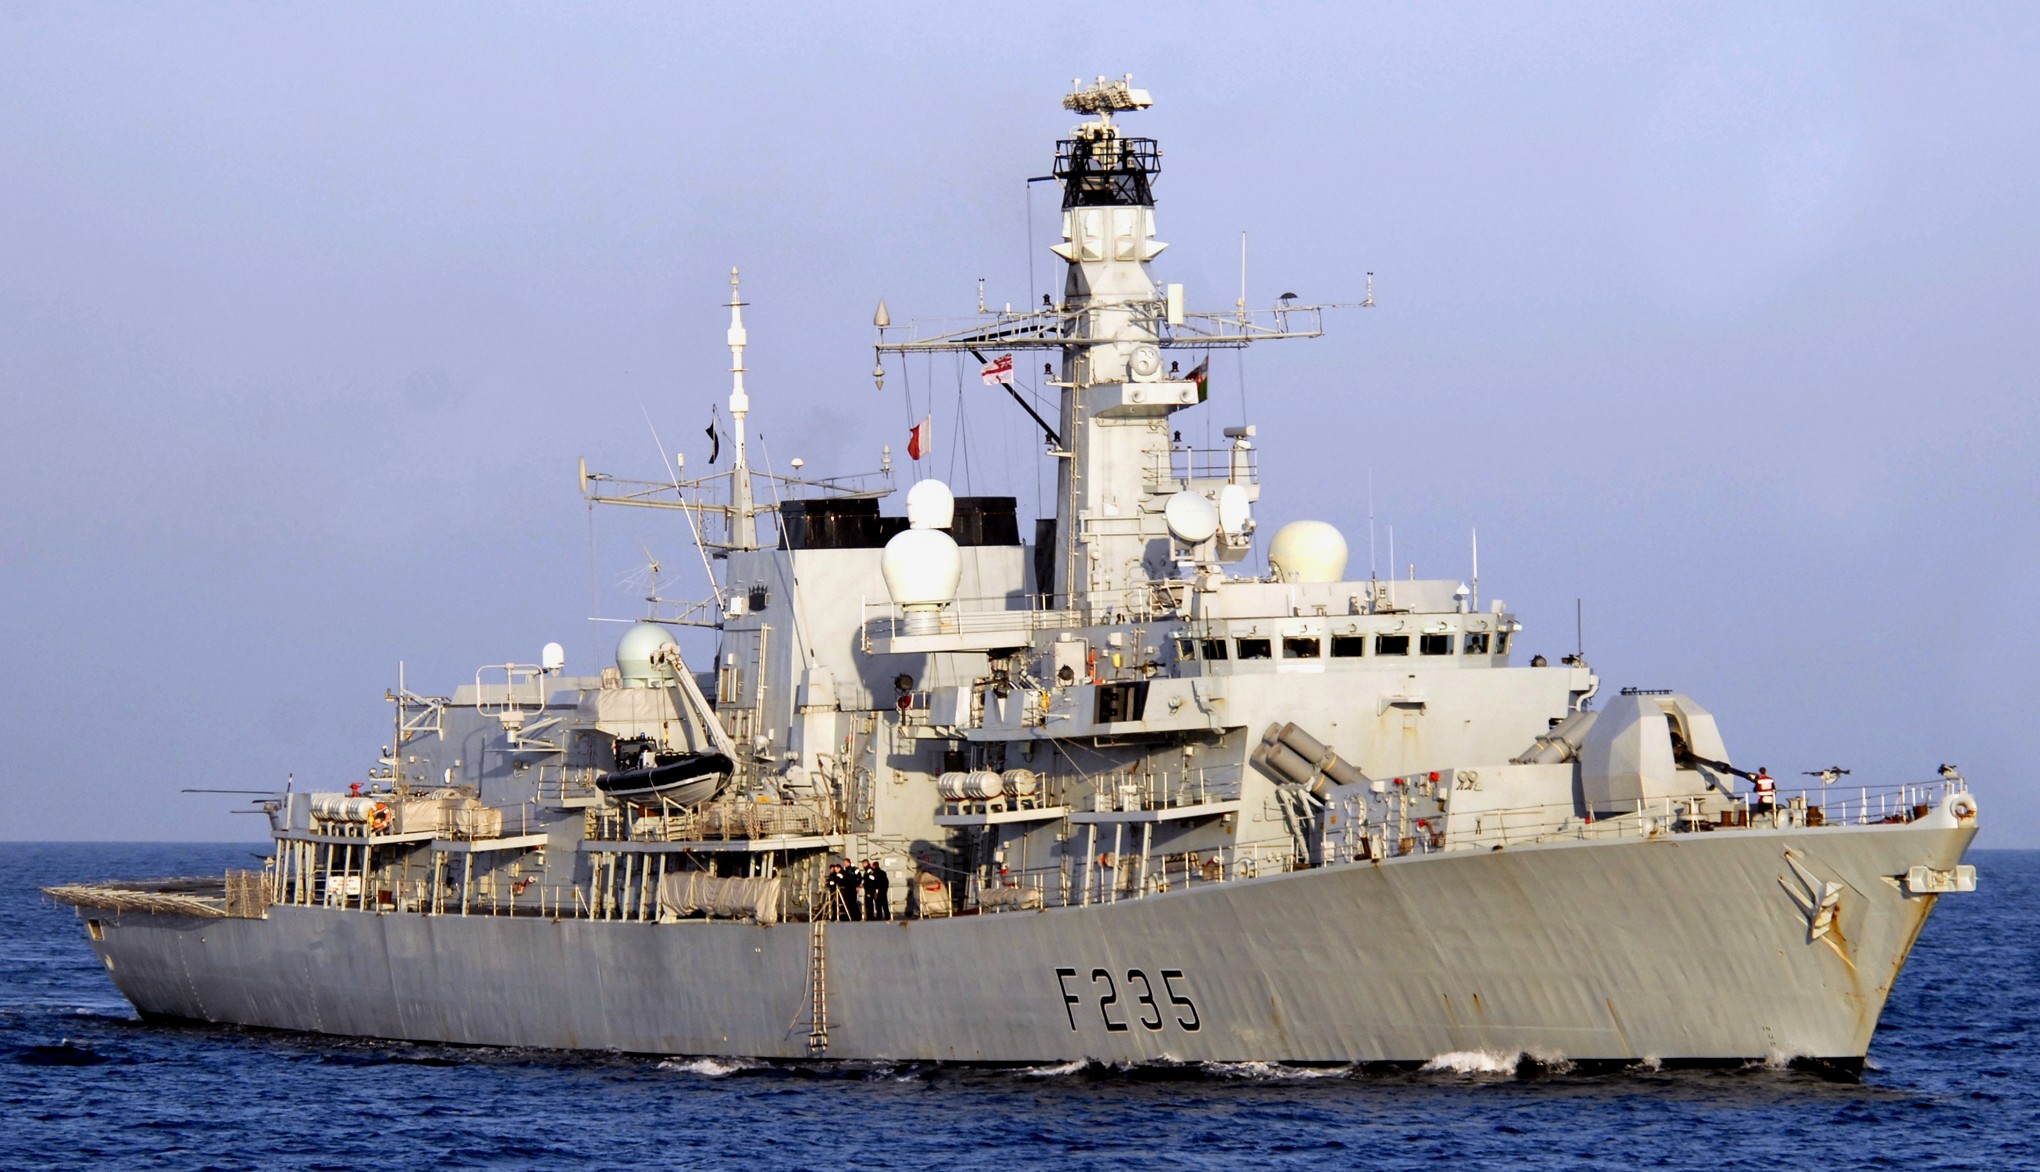 f-235 hms monmouth type 23 duke class guided missile frigate ffg royal navy 10